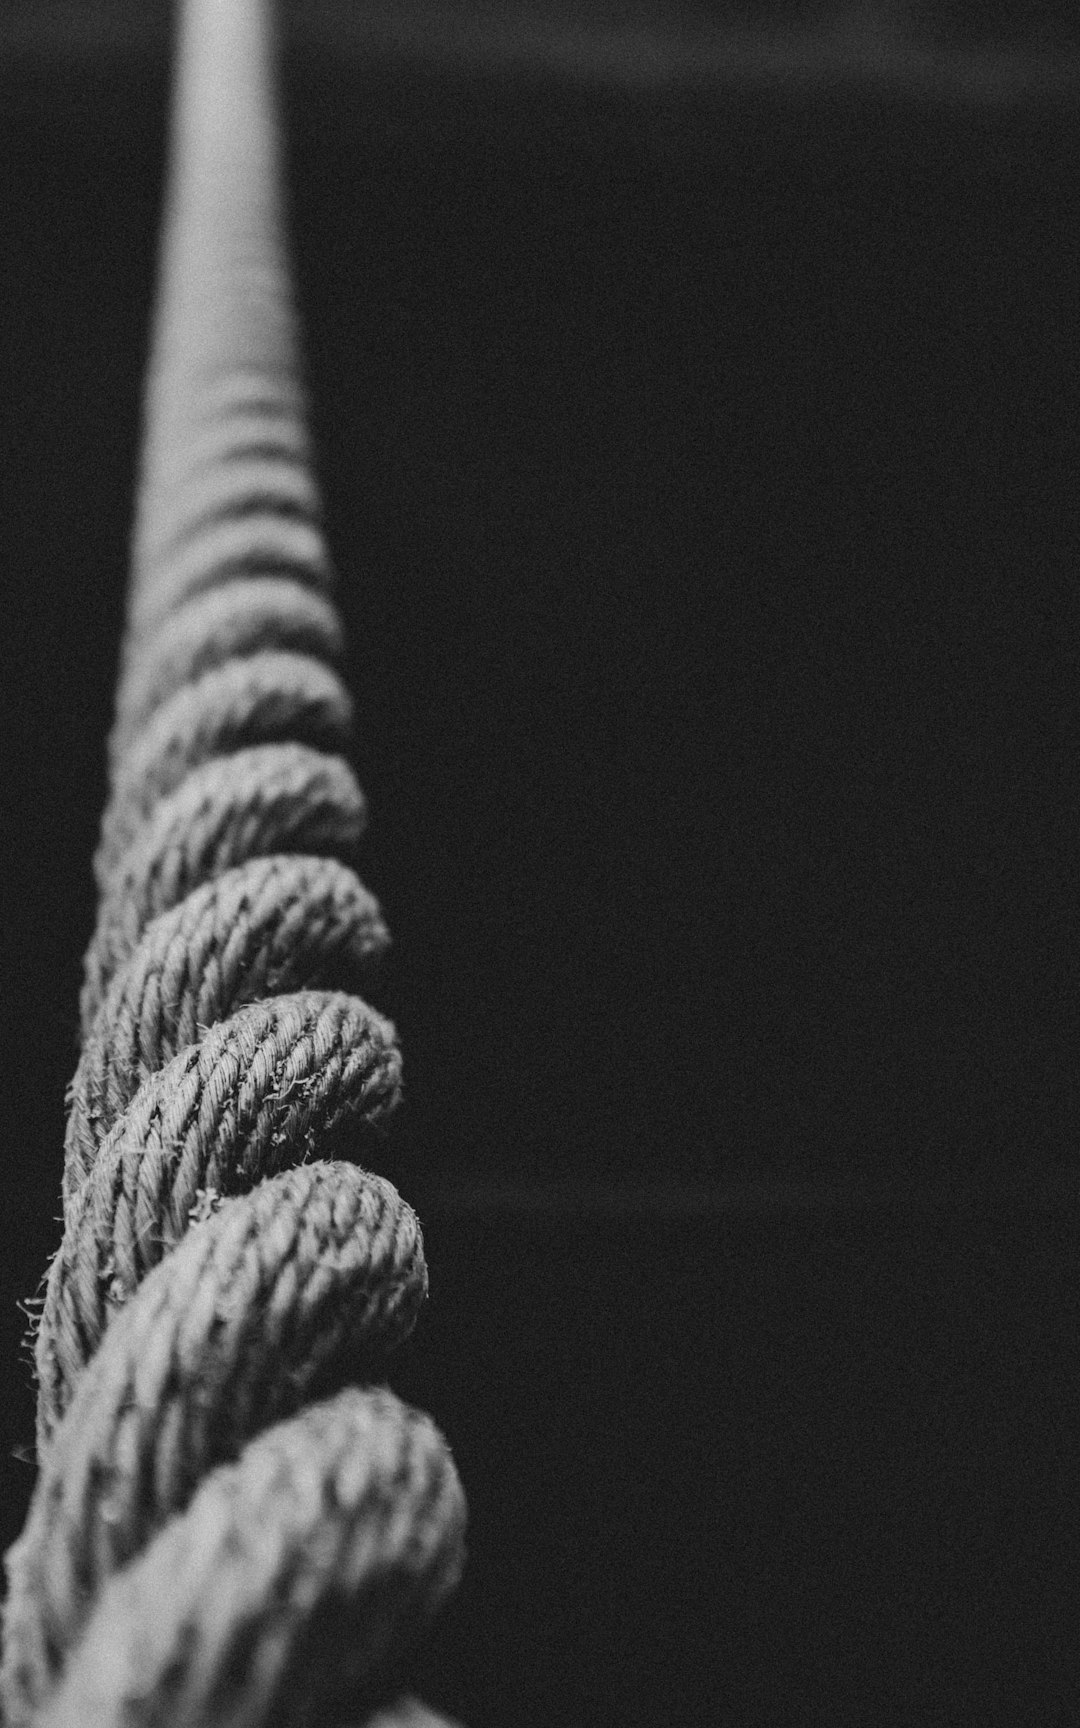 grayscale photo of rope on black background